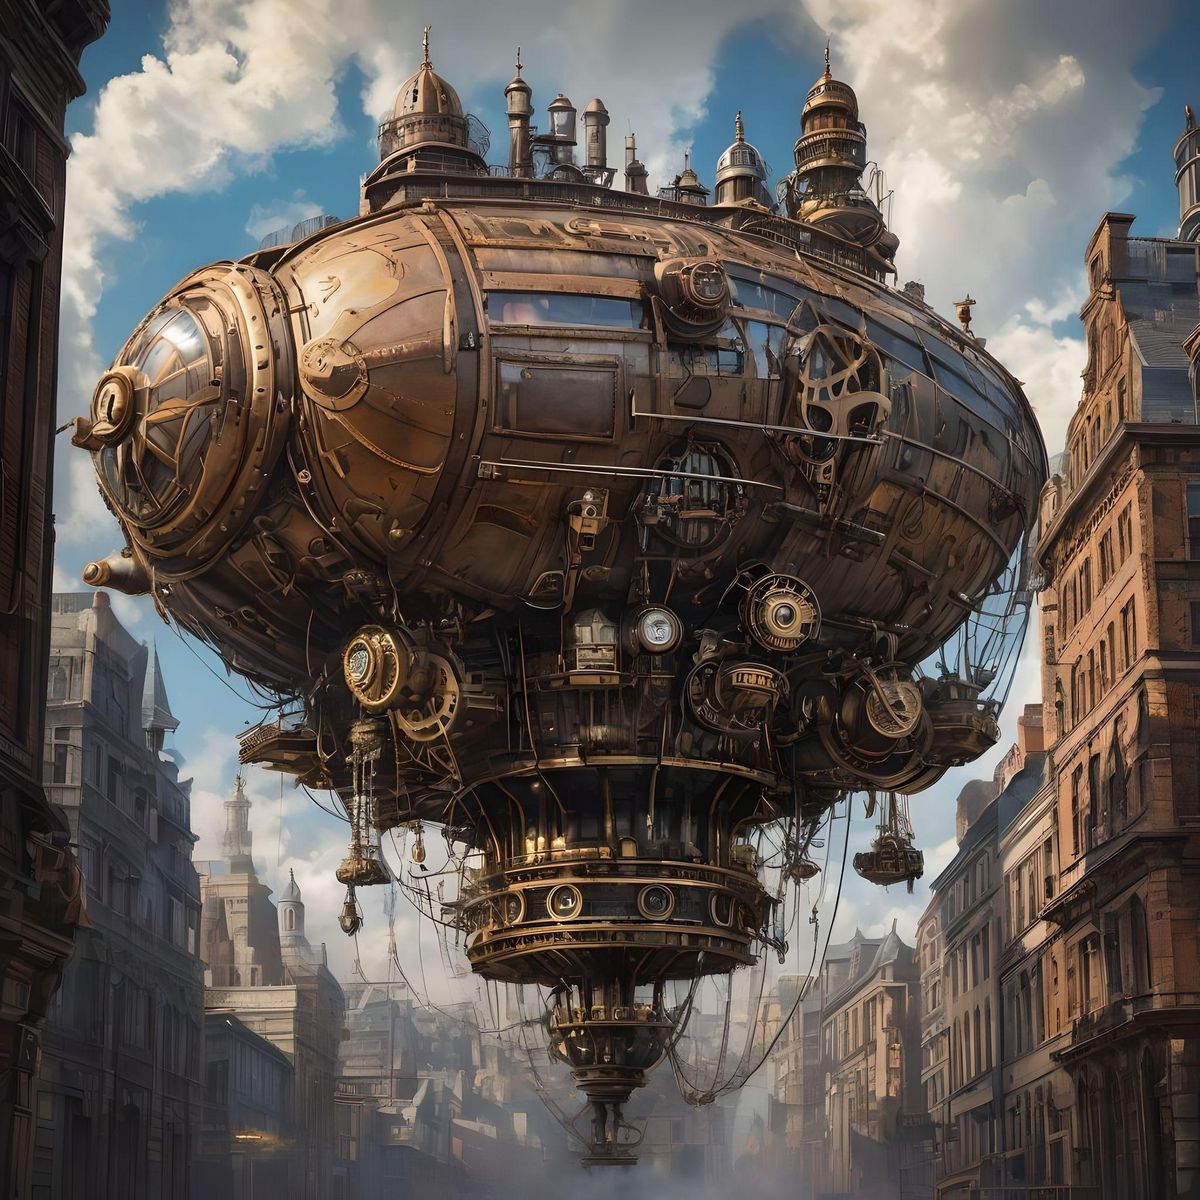 Title: "Steam City Wonders"

Description:

In the heart of a bustling metropolis lies "Steam City," a marvel of innovation and imagination where the past and future converge in a mesmerizing display of steampunk and retrofuturistic wonders.

The centerpiece of the artwork is a towering clockwork tower adorned with intricate gears, cogs, and brass accents, reaching towards the sky like a beacon of progress. Steam billows from its vents, creating an ethereal mist that shrouds the city below.

At the base of the tower, bustling streets are lined with Victorian-era buildings adorned with fantastical steam-powered contraptions and neon signs, blending the elegance of the past with the technology of the future. Airships glide gracefully overhead, propelled by giant propellers and adorned with ornate detailing reminiscent of a bygone era.

In the foreground, a mysterious character emerges from the shadows, dressed in a steampunk-inspired ensemble of leather, goggles, and gears. With a sense of adventure in their eyes, they stand against the backdrop of the city, ready to embark on a journey into the unknown.

Surrounding the character are a variety of animal robots, each more fantastical than the last. A mechanical owl perches on their shoulder, its brass wings outstretched in flight. Nearby, a steam-powered elephant trumpets loudly, its metallic trunk spraying clouds of steam into the air. In the distance, a sleek panther prowls through the streets, its glowing eyes piercing through the darkness.

As day turns to night, the city comes alive with a symphony of light and sound. Neon signs flicker and dance, casting vibrant hues across the cobblestone streets. The air is filled with the sound of whirring gears, hissing steam, and the rhythmic clanking of machinery, creating a sense of energy and excitement that permeates the air.